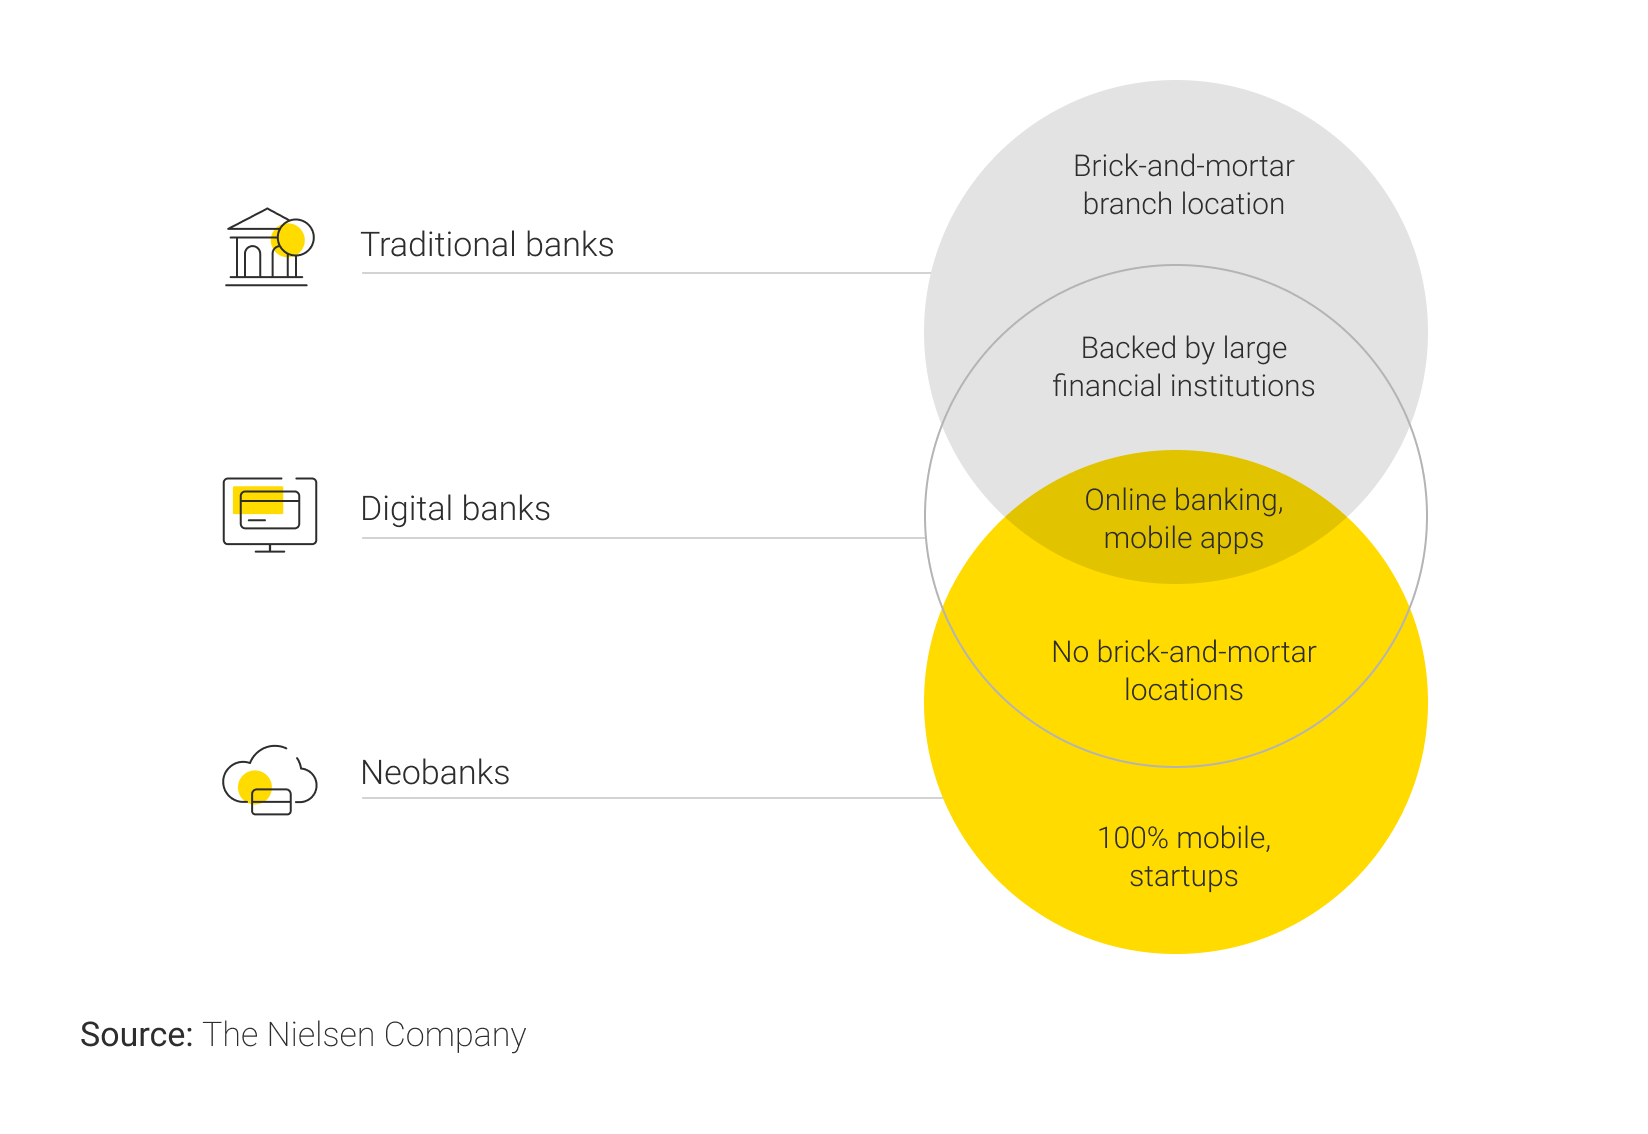 Neobanks, digital banks, and traditional banks - what’s the difference?